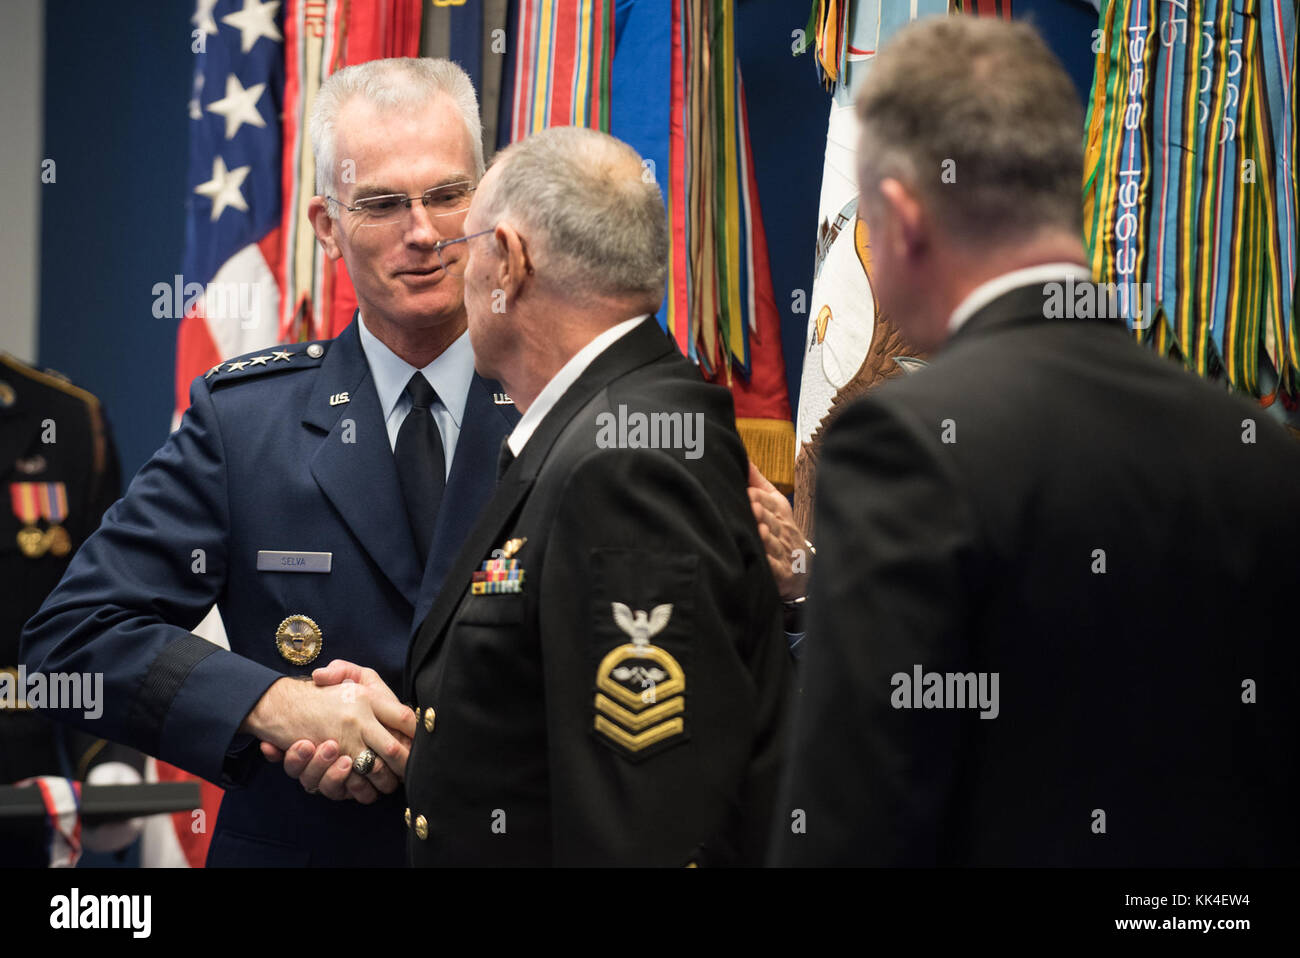 U.S. Air Force Gen. Paul J. Selva, Vice Chairman of the Joint Chiefs of Staff, greets Retired U.S. Navy Chief Petty Officer Jim Marshall, the U.S. Navy awardee, during the 2017 Spirit of Hope Awards at the Hall of Heroes in the Pentagon, Oct. 26, 2017. The Spirit of Hope Award is awarded to men and women of the U.S. Armed Forces, entertainers, and other distinguished Americans and organizations whose patriotism and service reflect that of Mr. Bob Hope. The recipients selflessly contributed an extraordinary amount of time, talent, or resources to significantly enhance the quality of life or ser Stock Photo